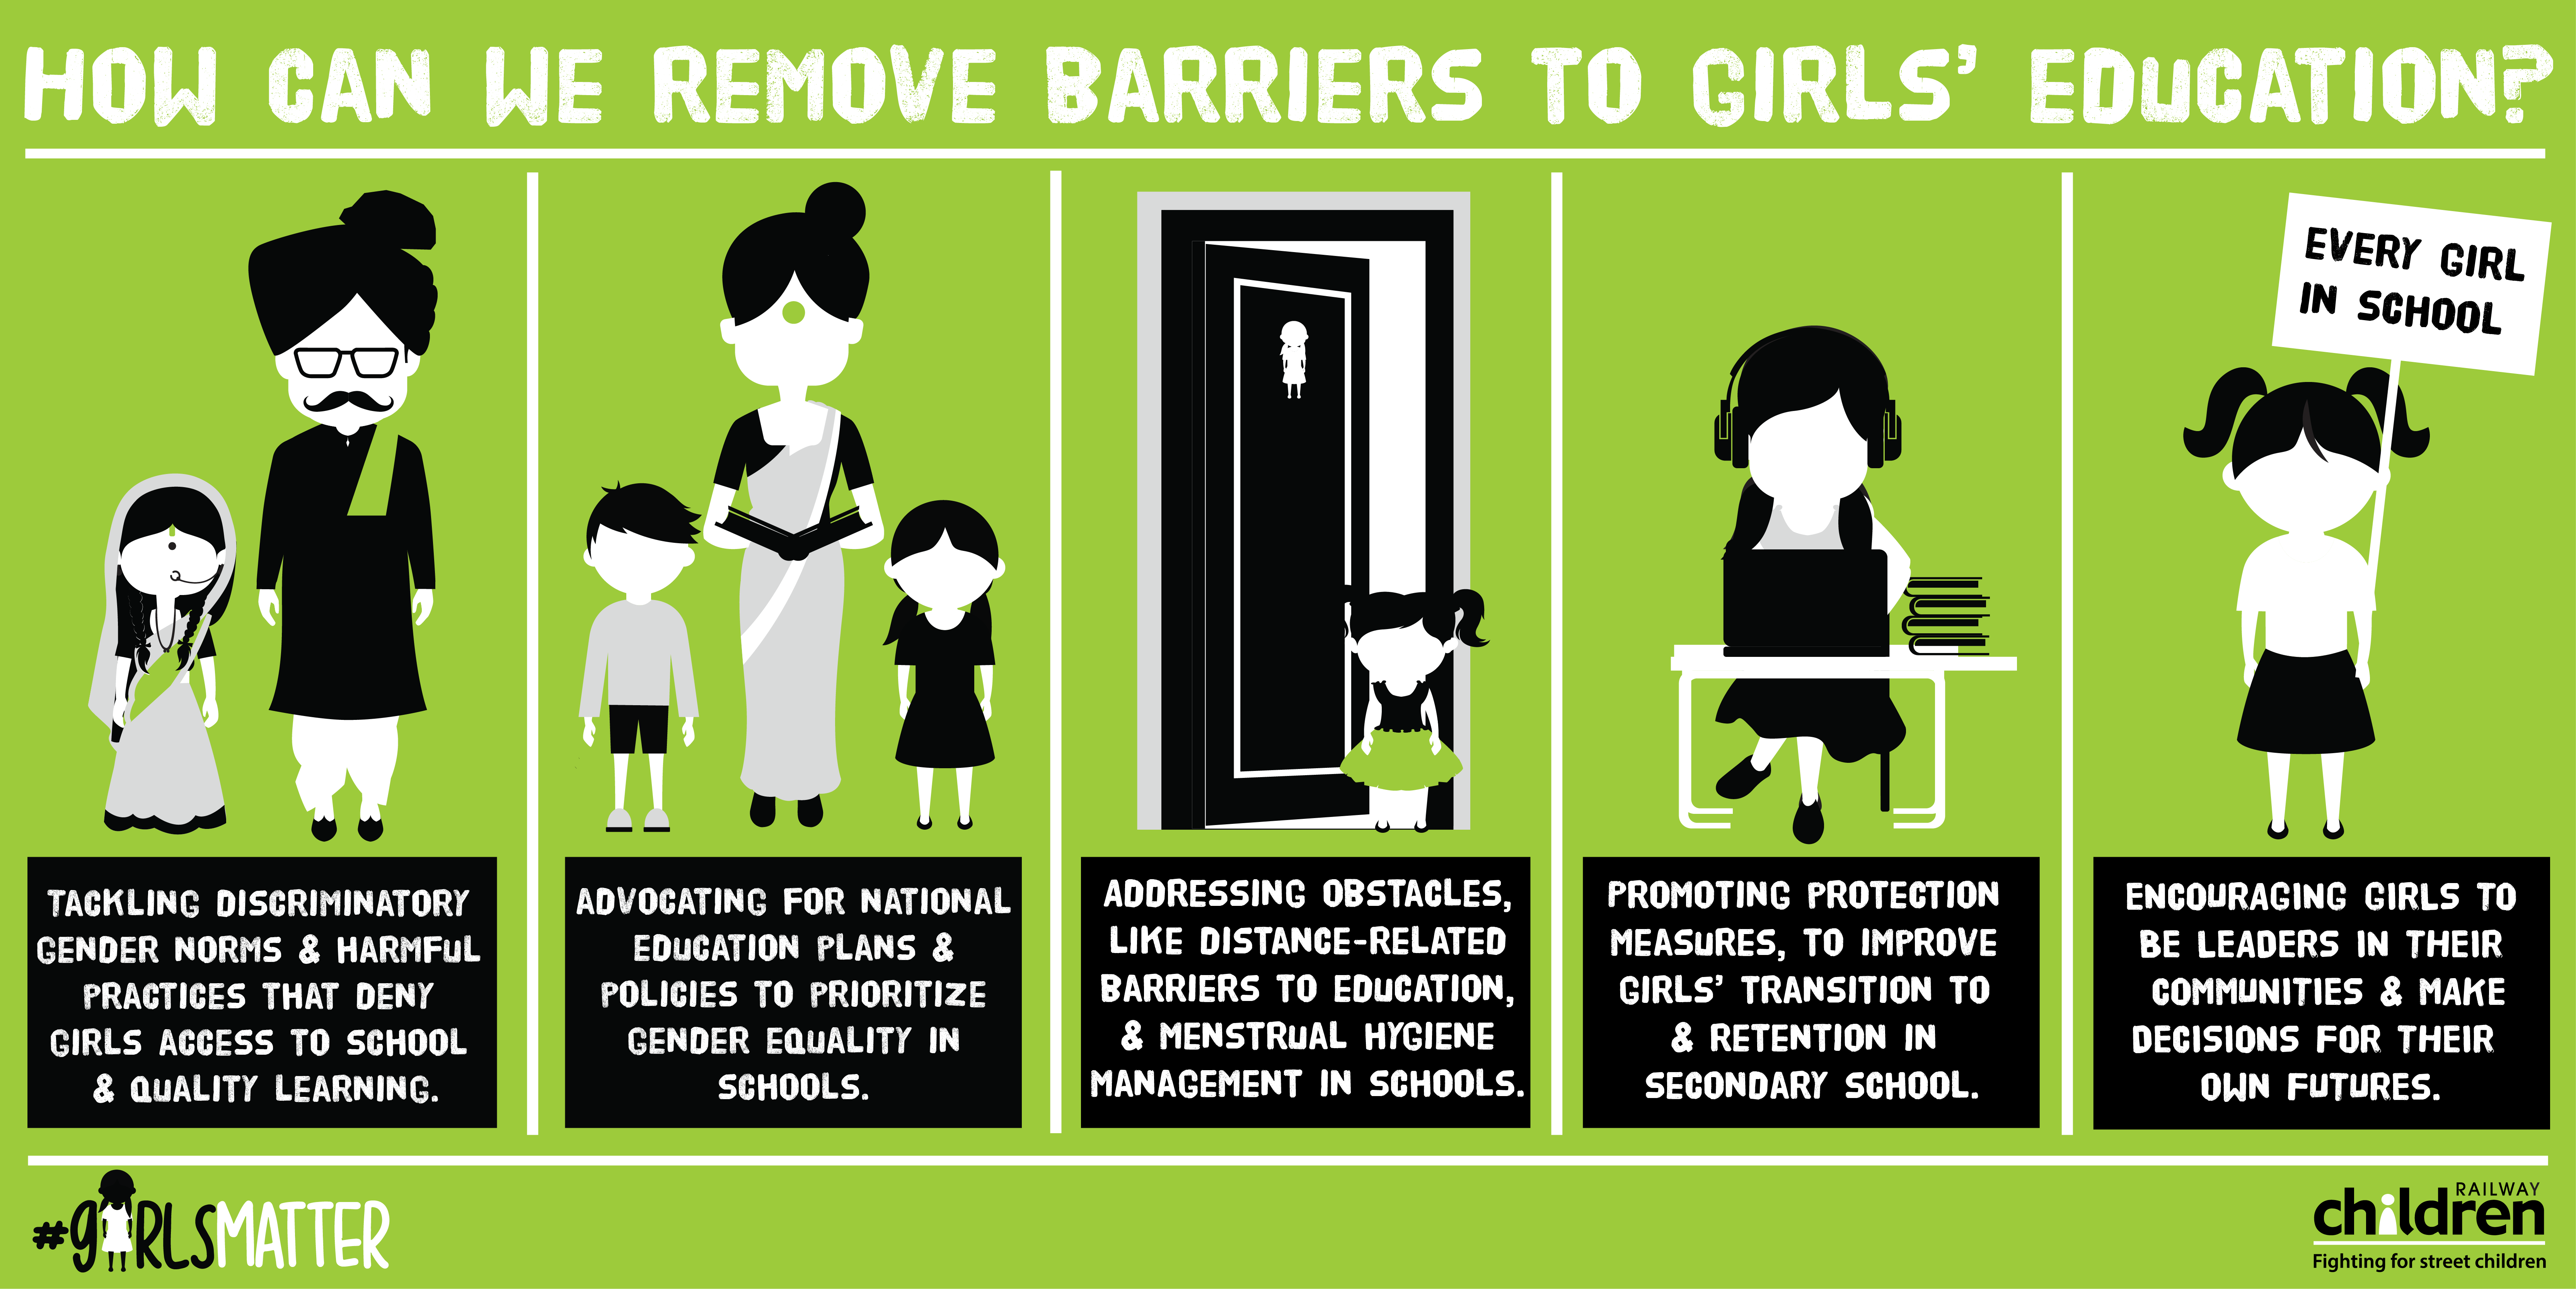 #GirlsMatter - How Can We Remove Barriers To Girls' Education?